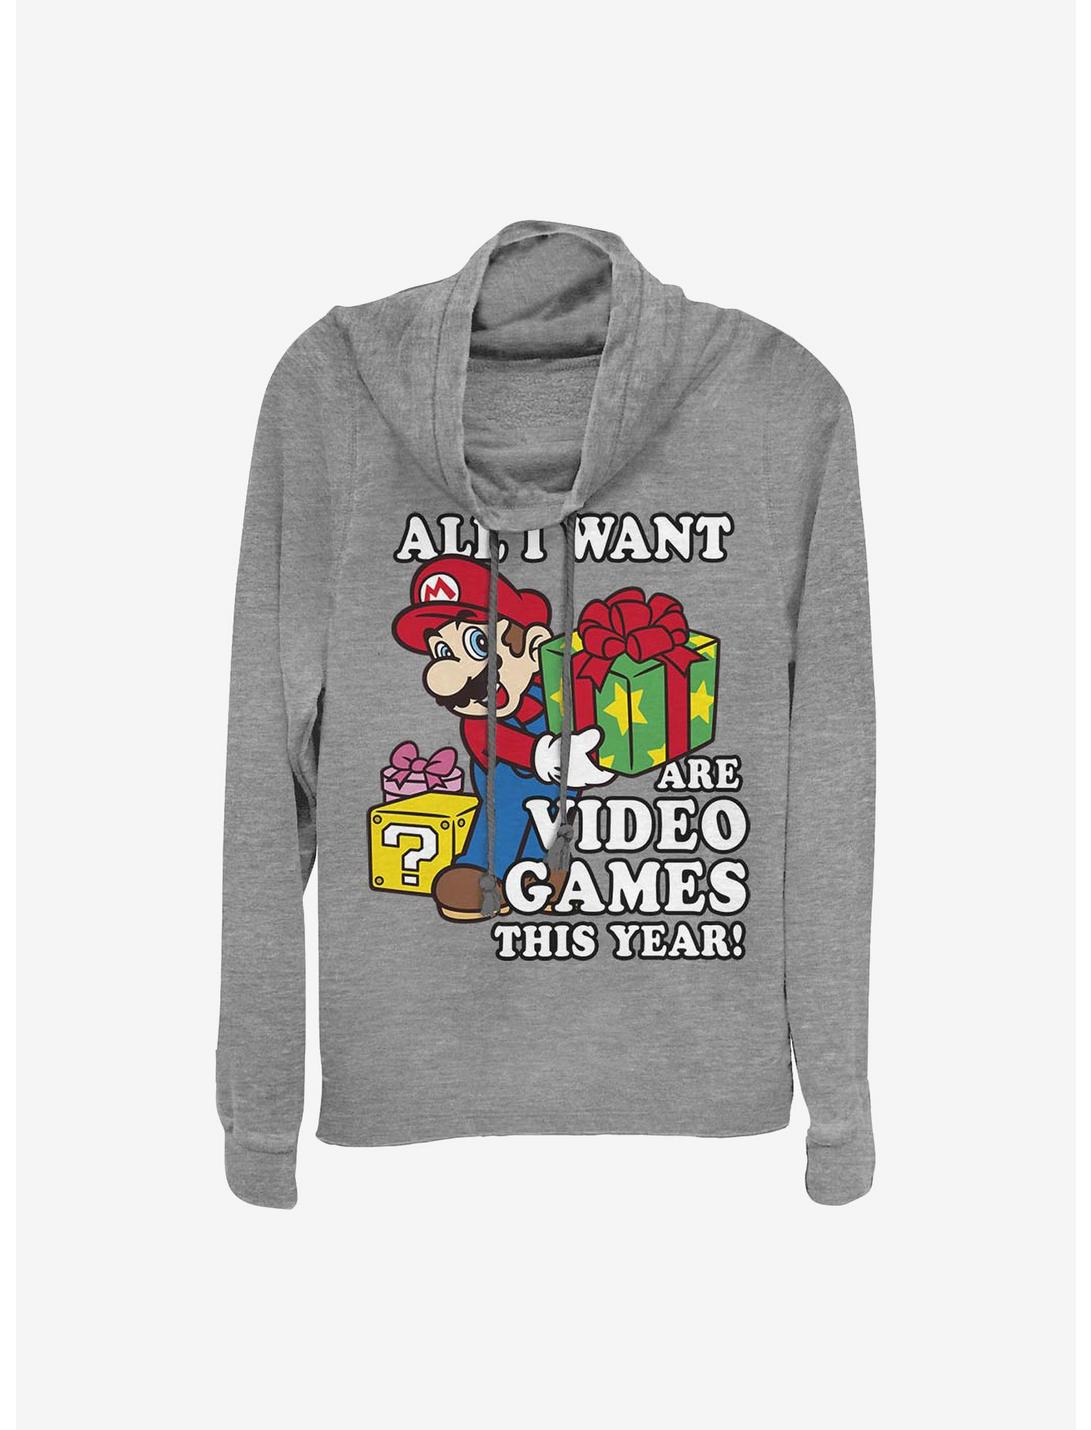 Super Mario All I Want Are Video Games Holiday Cowl Neck Long-Sleeve Girls Top, GRAY HTR, hi-res